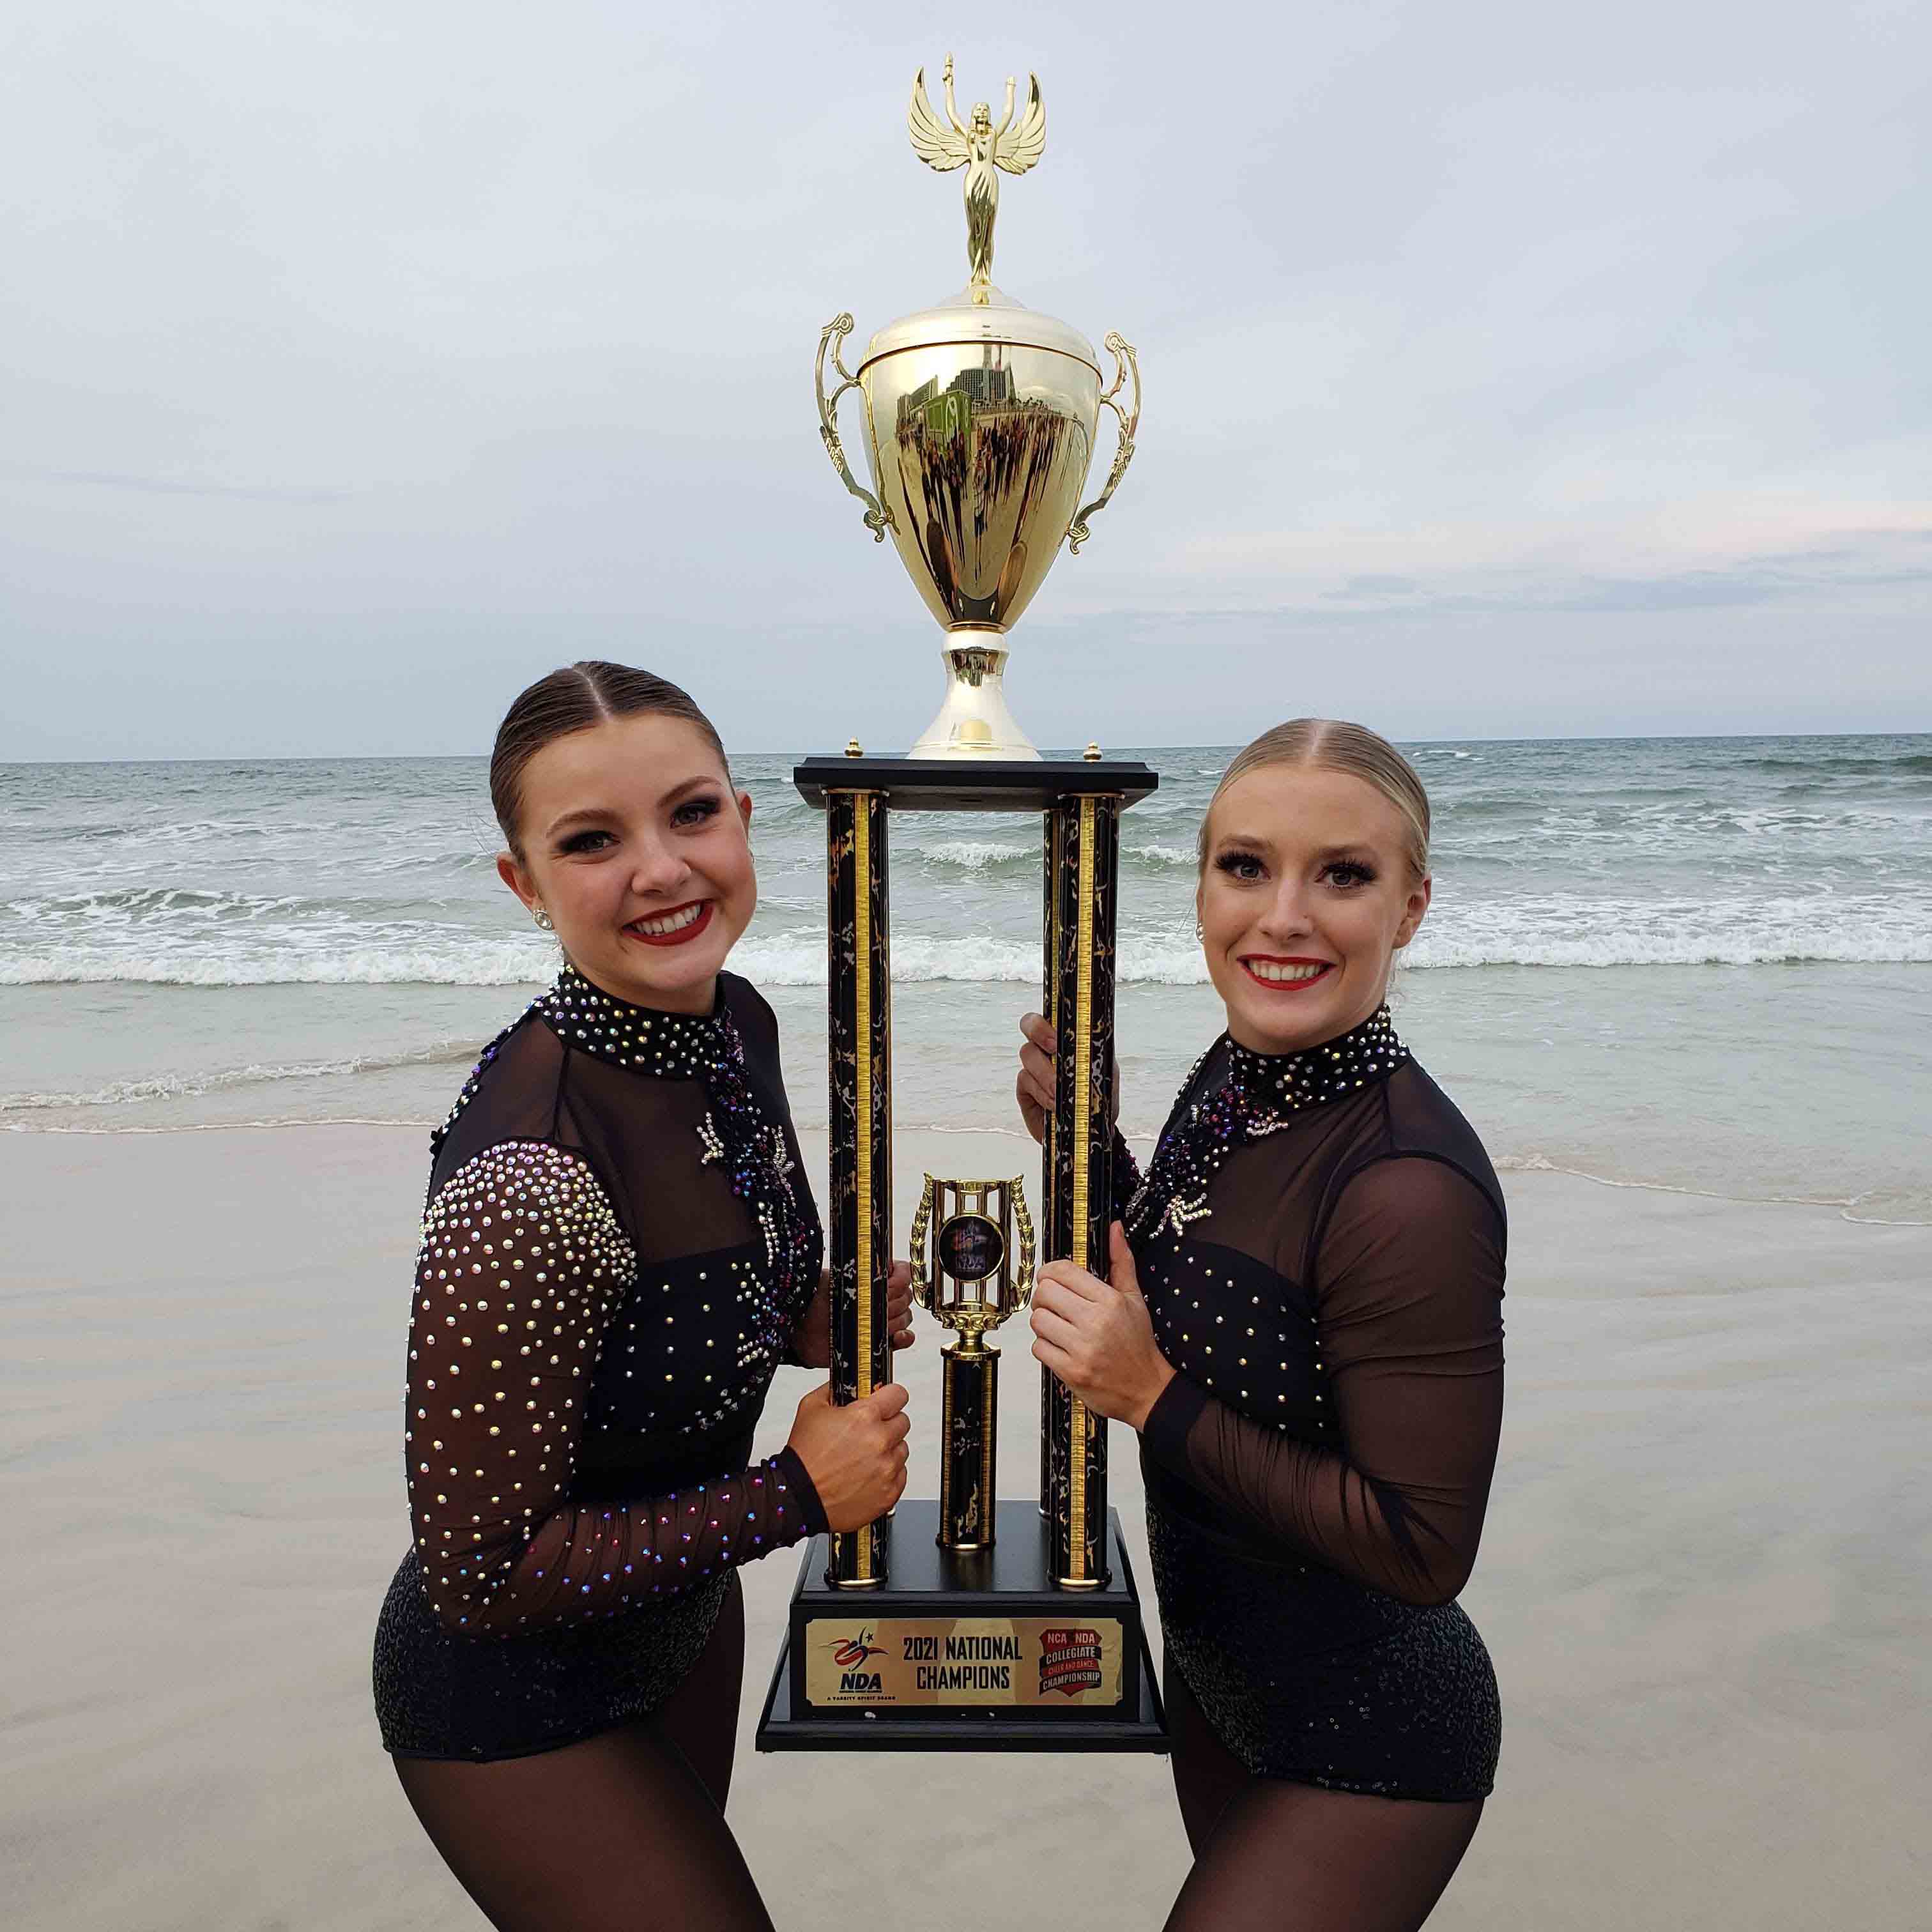 Morgan and Abby holding the trophy on the beah